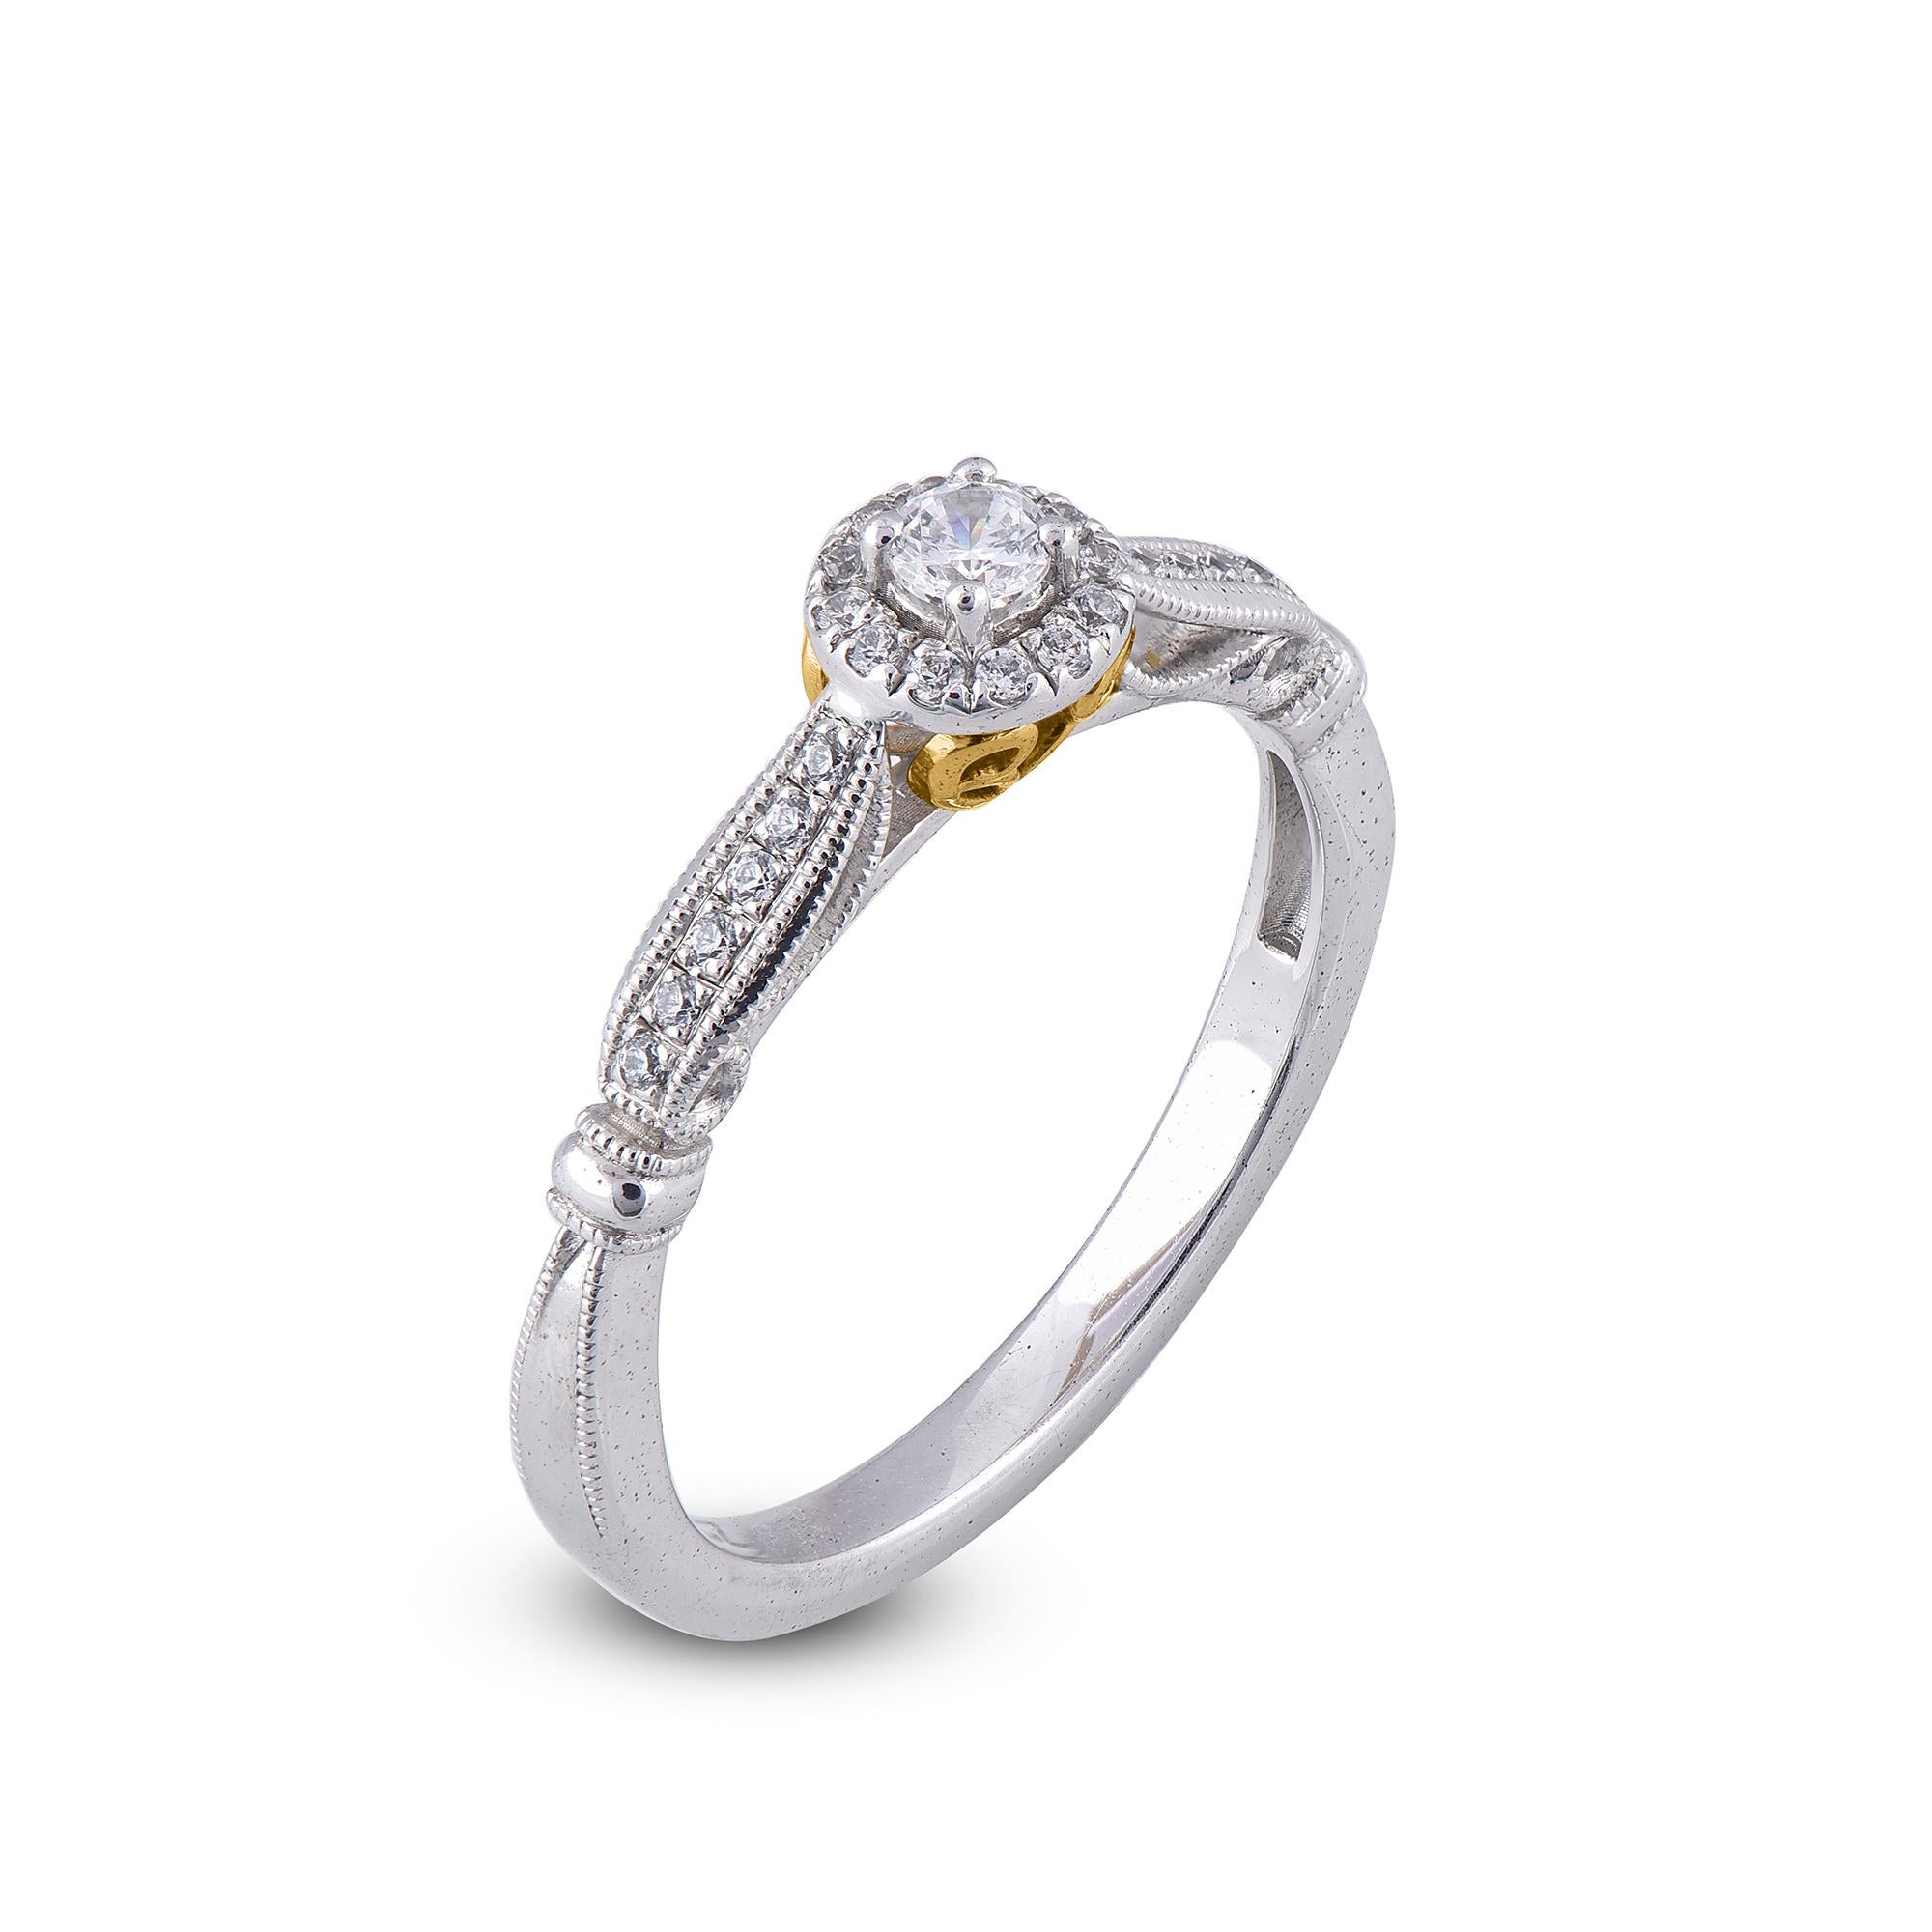 This ring dazzles with 0.22 ct of lined shank diamonds. Decorated with shimmering 25 round brilliant white diamonds set in prong and pave setting. We only use 100% natural and conflict free diamonds which shimmers in  H-I color and I2 clarity. This